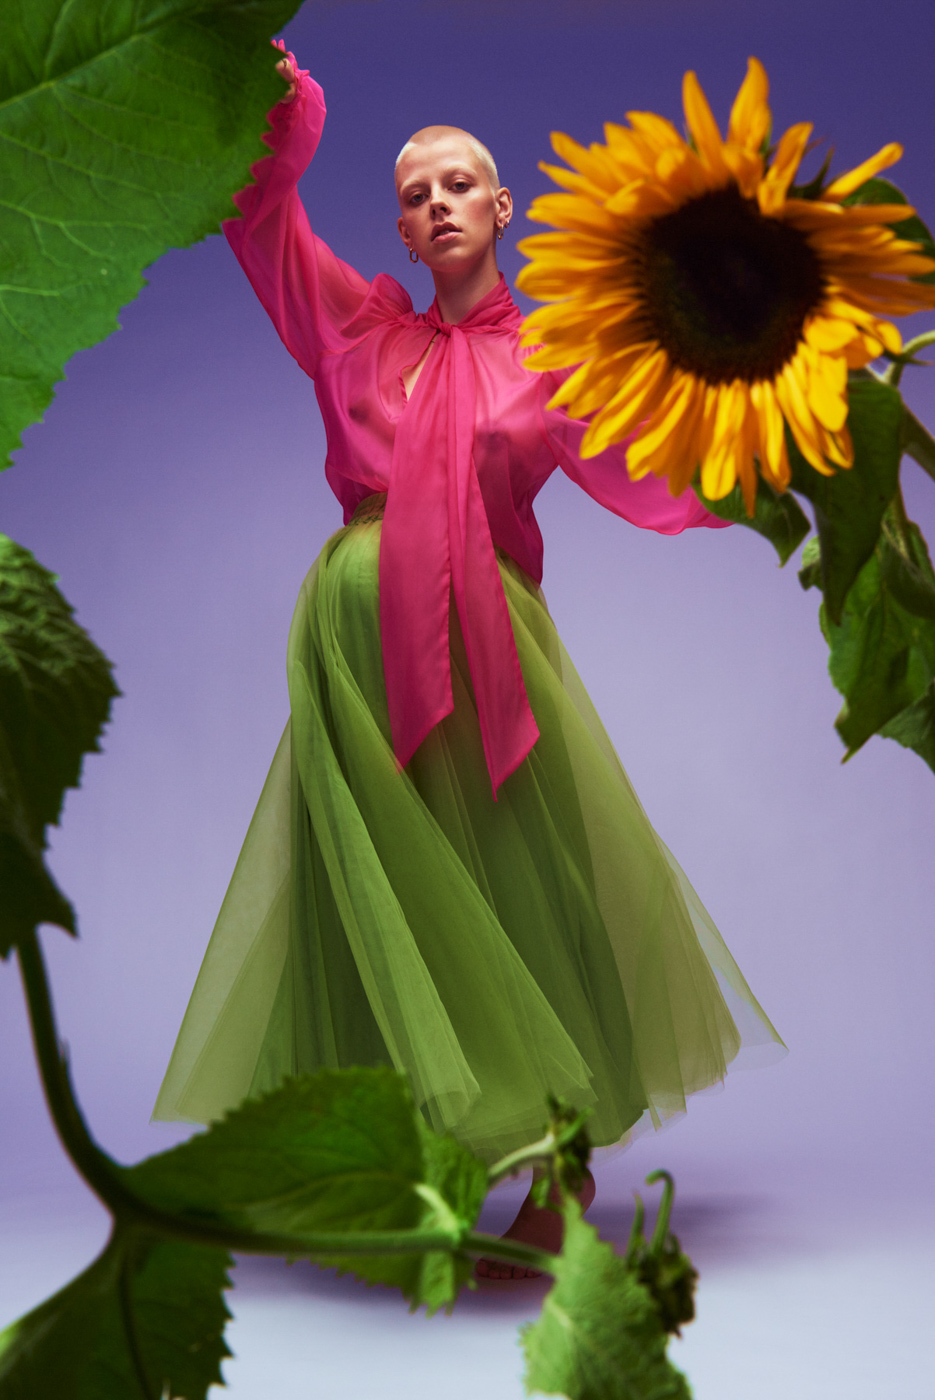 Pregnant_short_haired_blond_woman_wearing_pink_blouse_and_green_tulle_skirt_behind_sunflowers_on_lilac_background_photographed_by_Sara_Lehtomaa